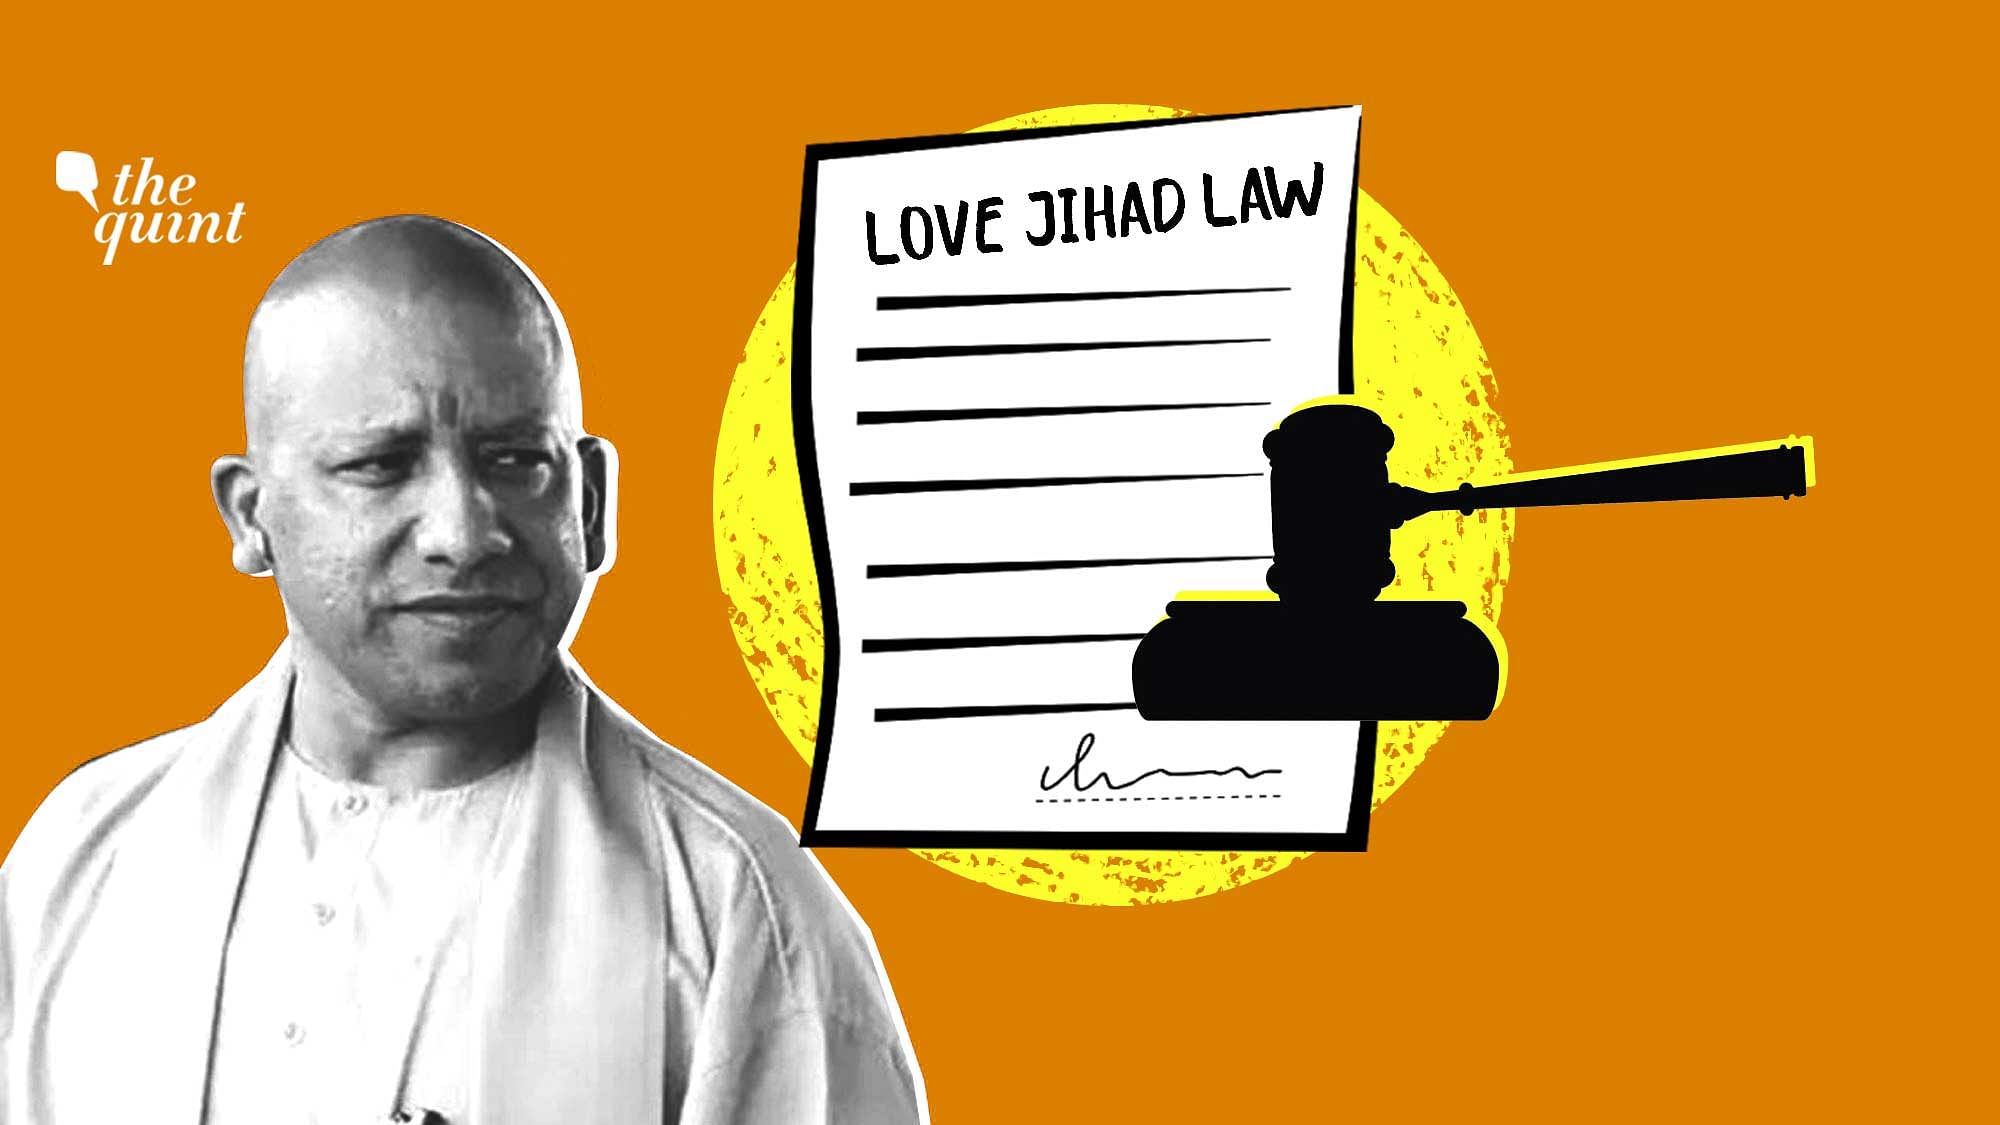 The first charge sheet under Uttar Pradesh’s anti-conversion ‘love jihad’ laws has been filed against a 22-year-old carpenter in Bijnor, for allegedly kidnapping a Dalit woman last month.